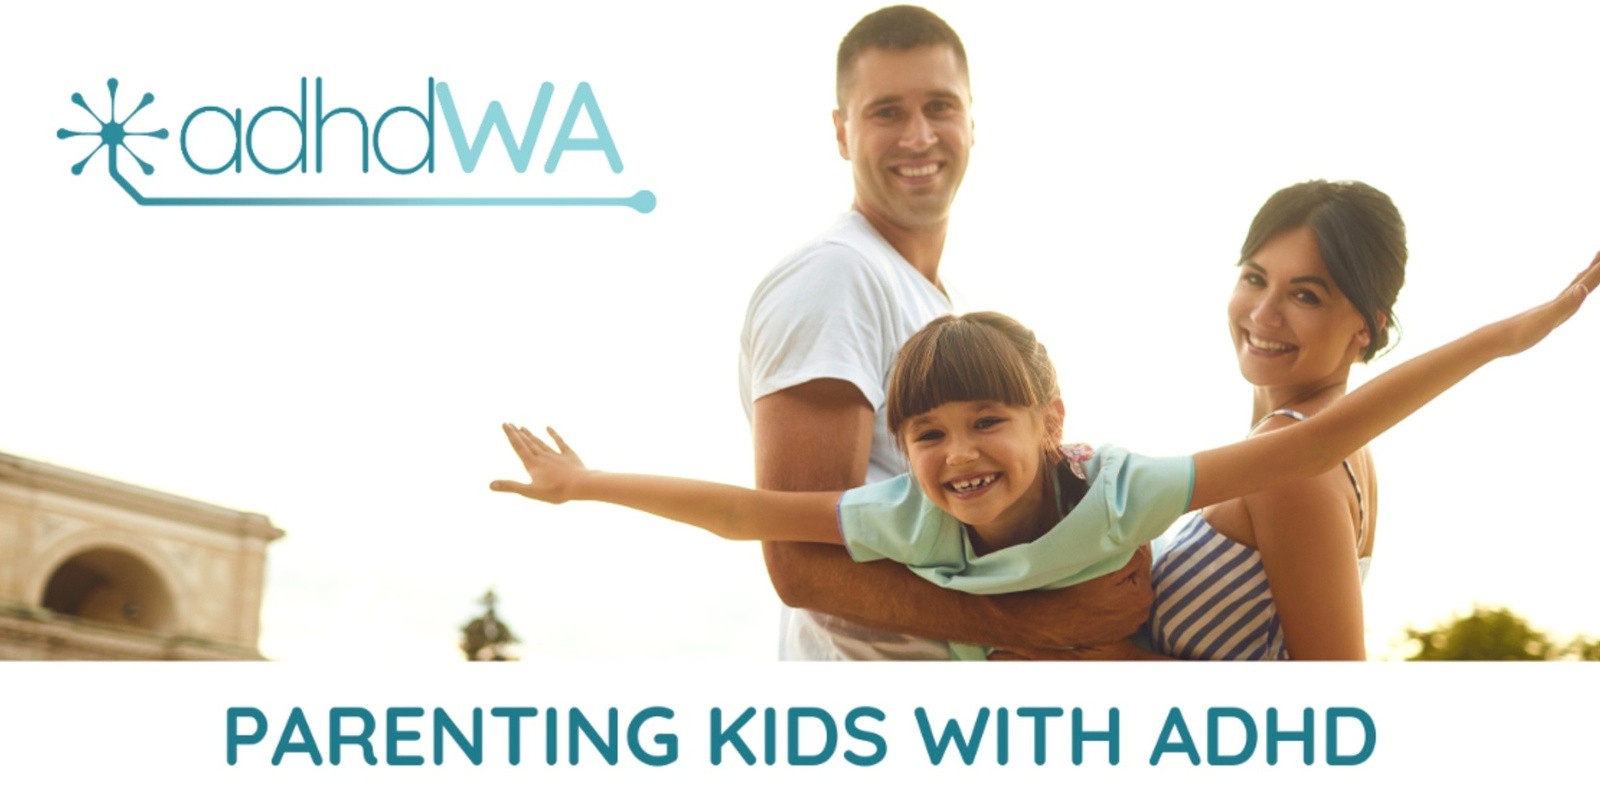 Banner image for Parenting Kids with ADHD - Wickham